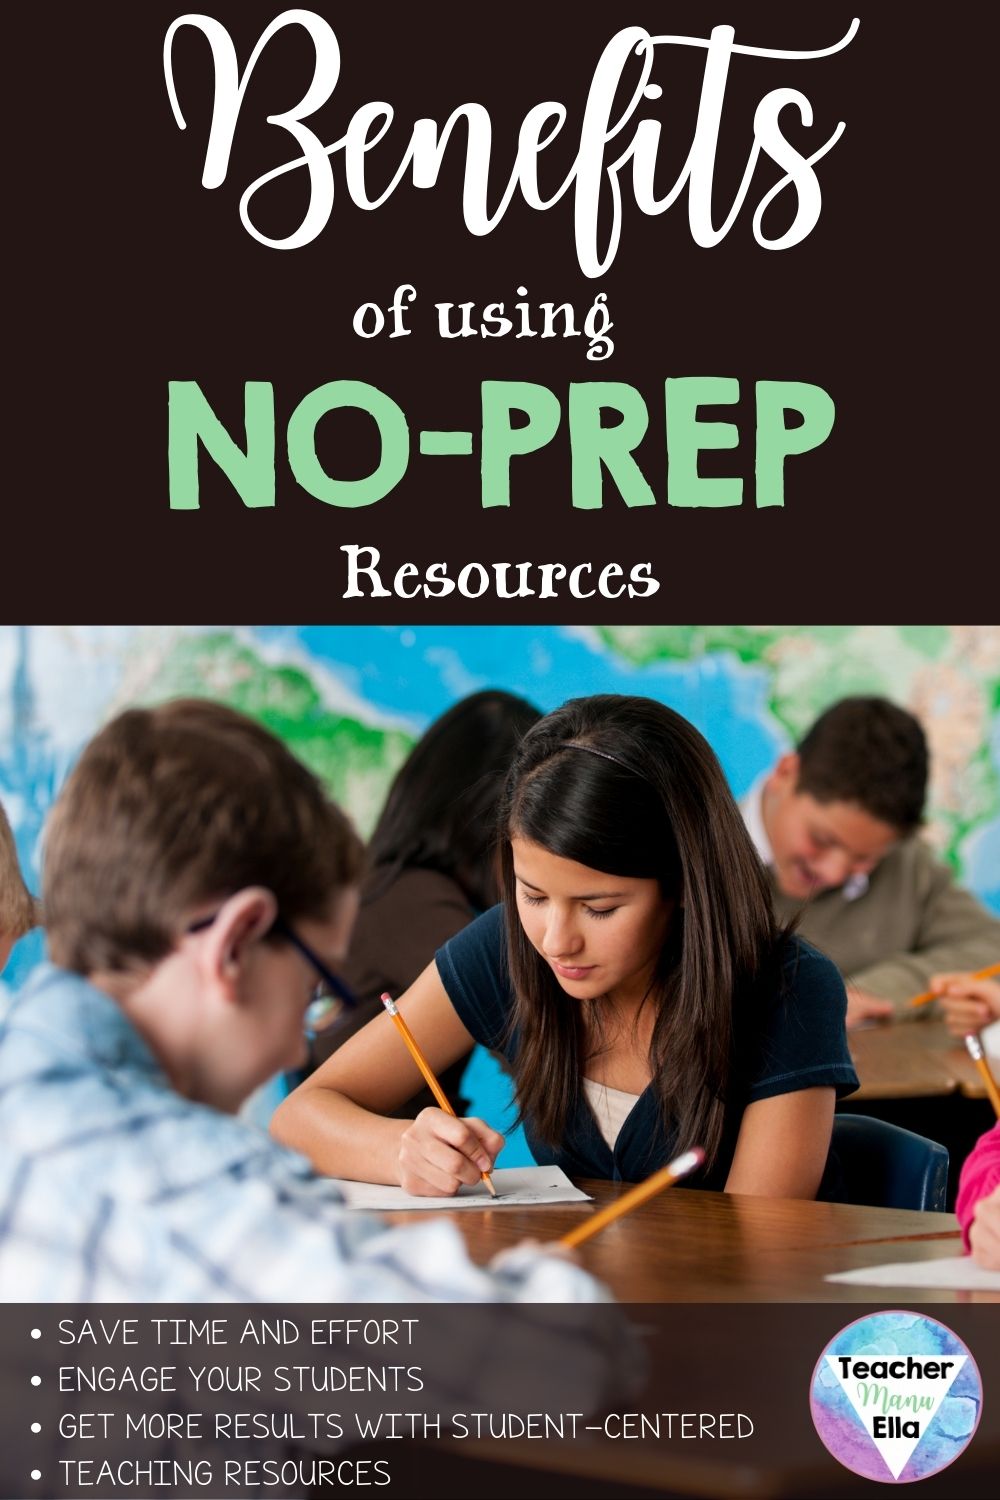 Benefits of No-Prep Social Studies Worksheets and Interactive Notebooks from TeacherManuella